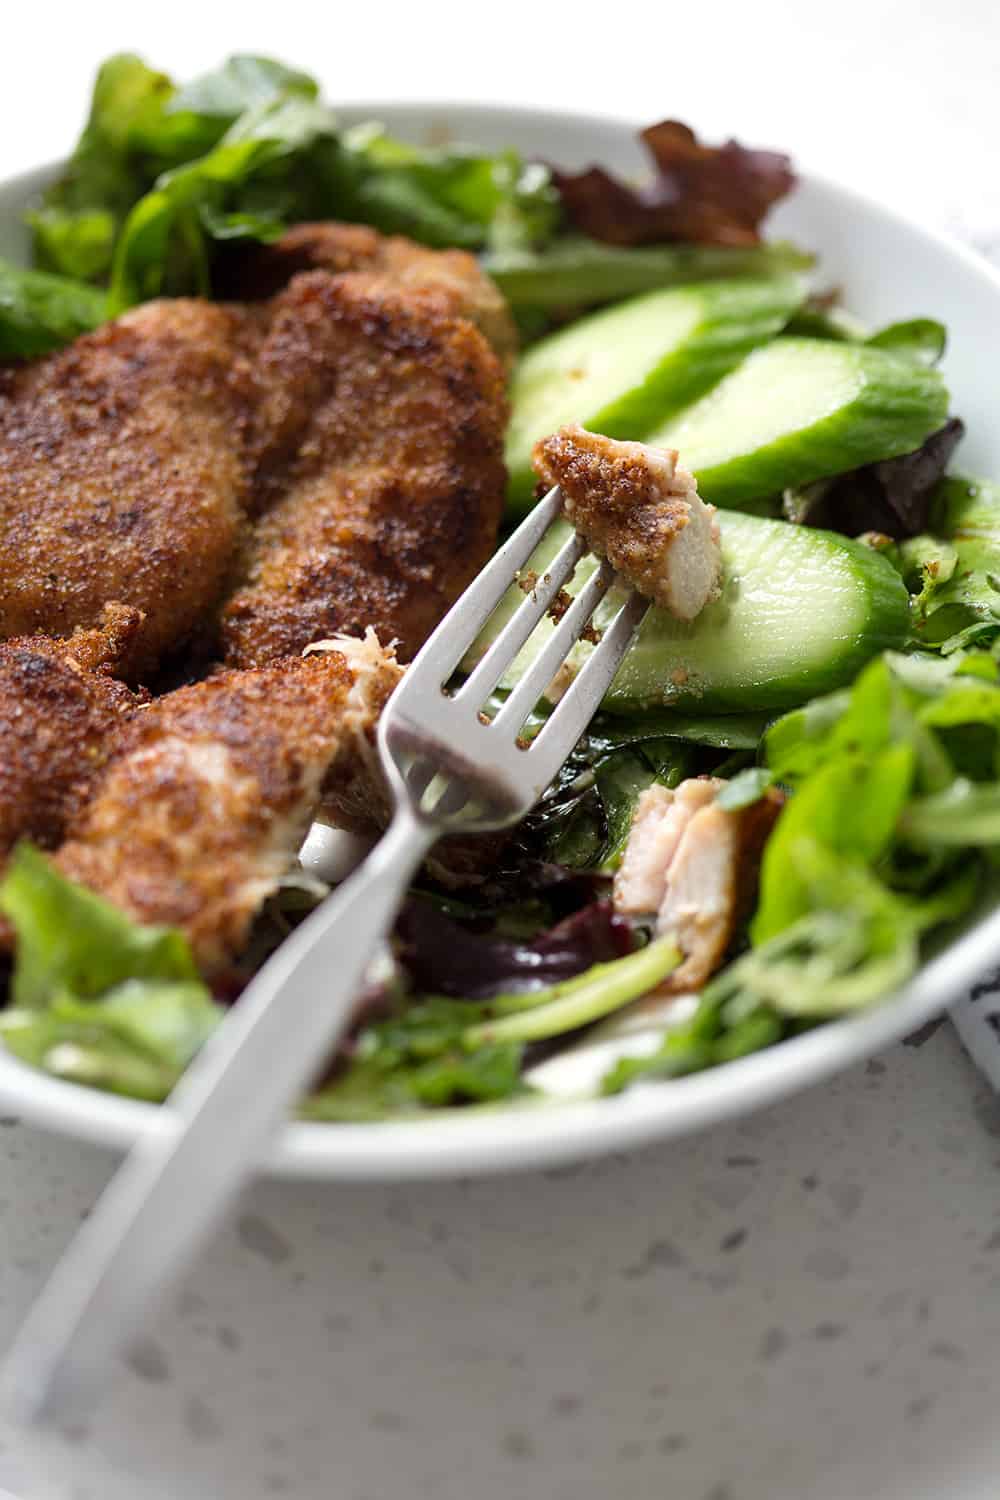 Breaded-and-Pan-Fried-Chicken-Thighs-33sm | Bon Aippetit